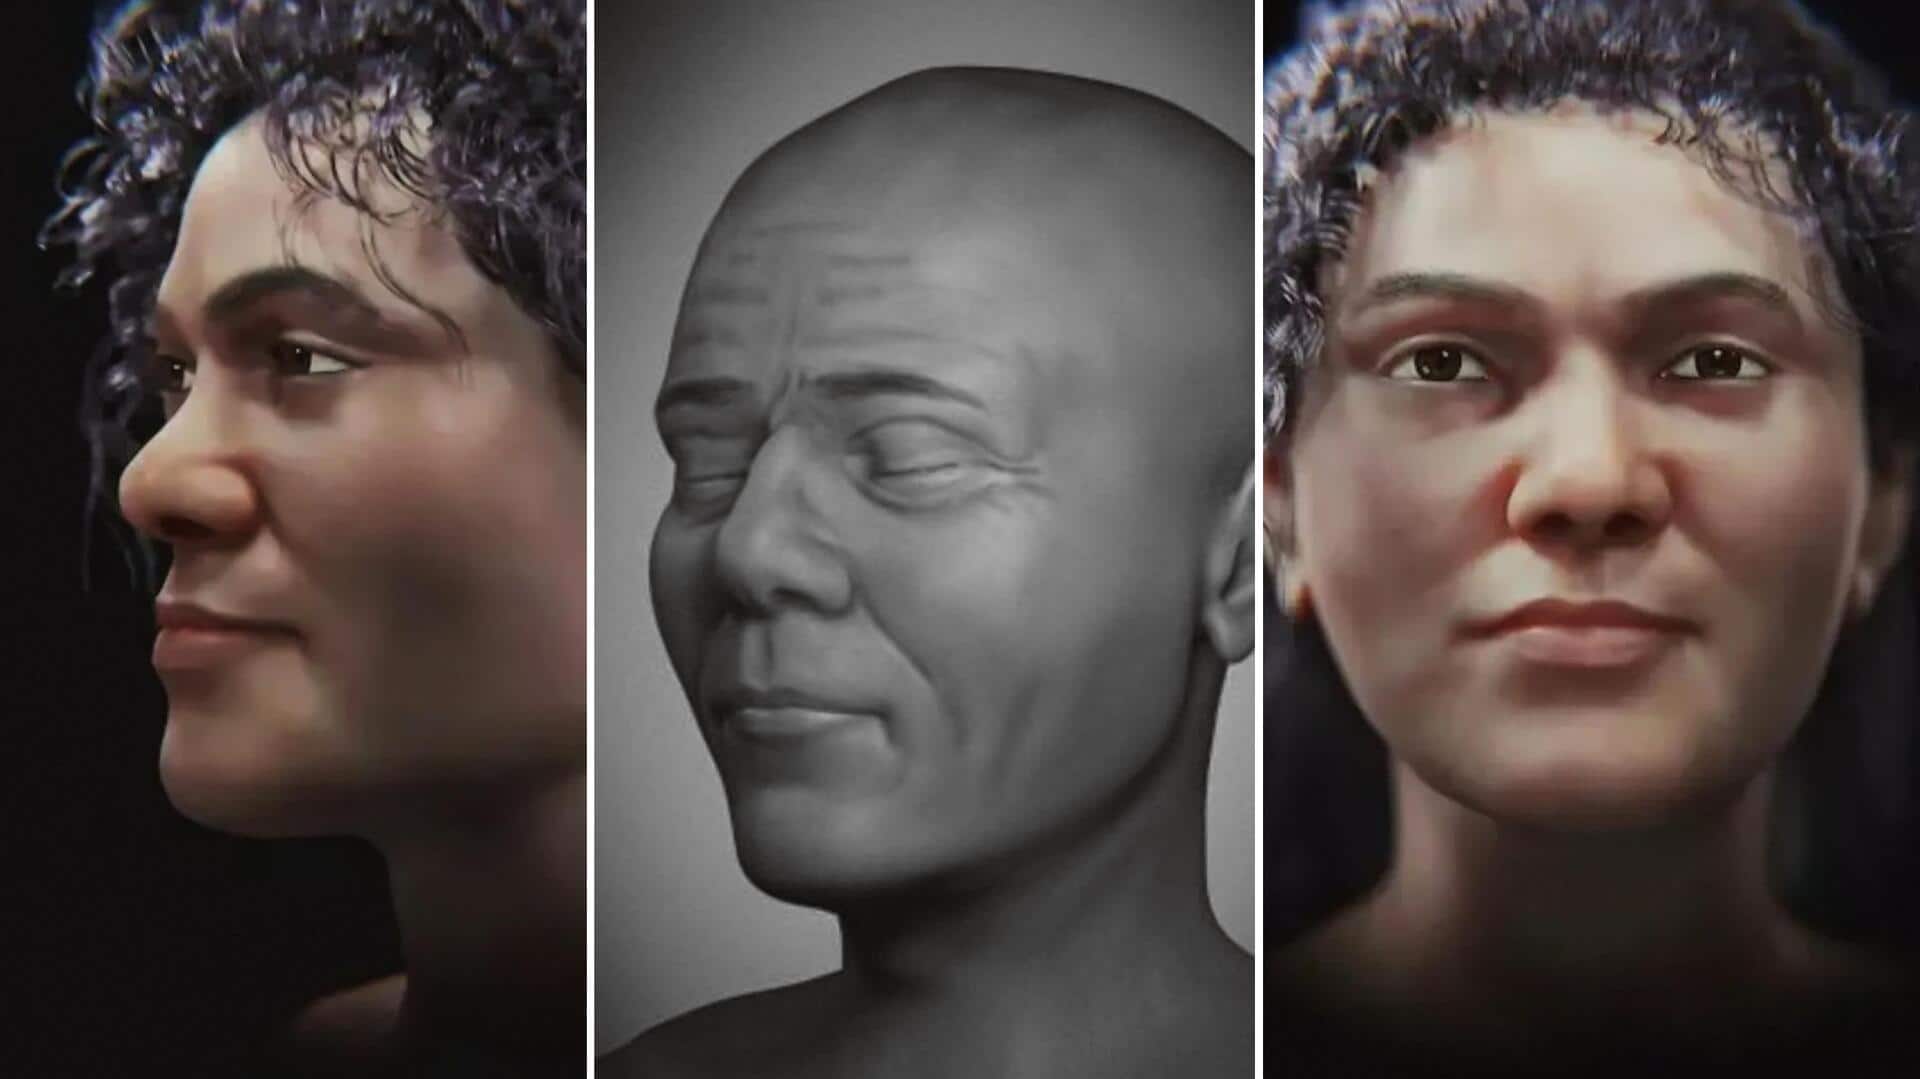 Face of oldest-modern woman who lived 45,000 years ago reconstructed